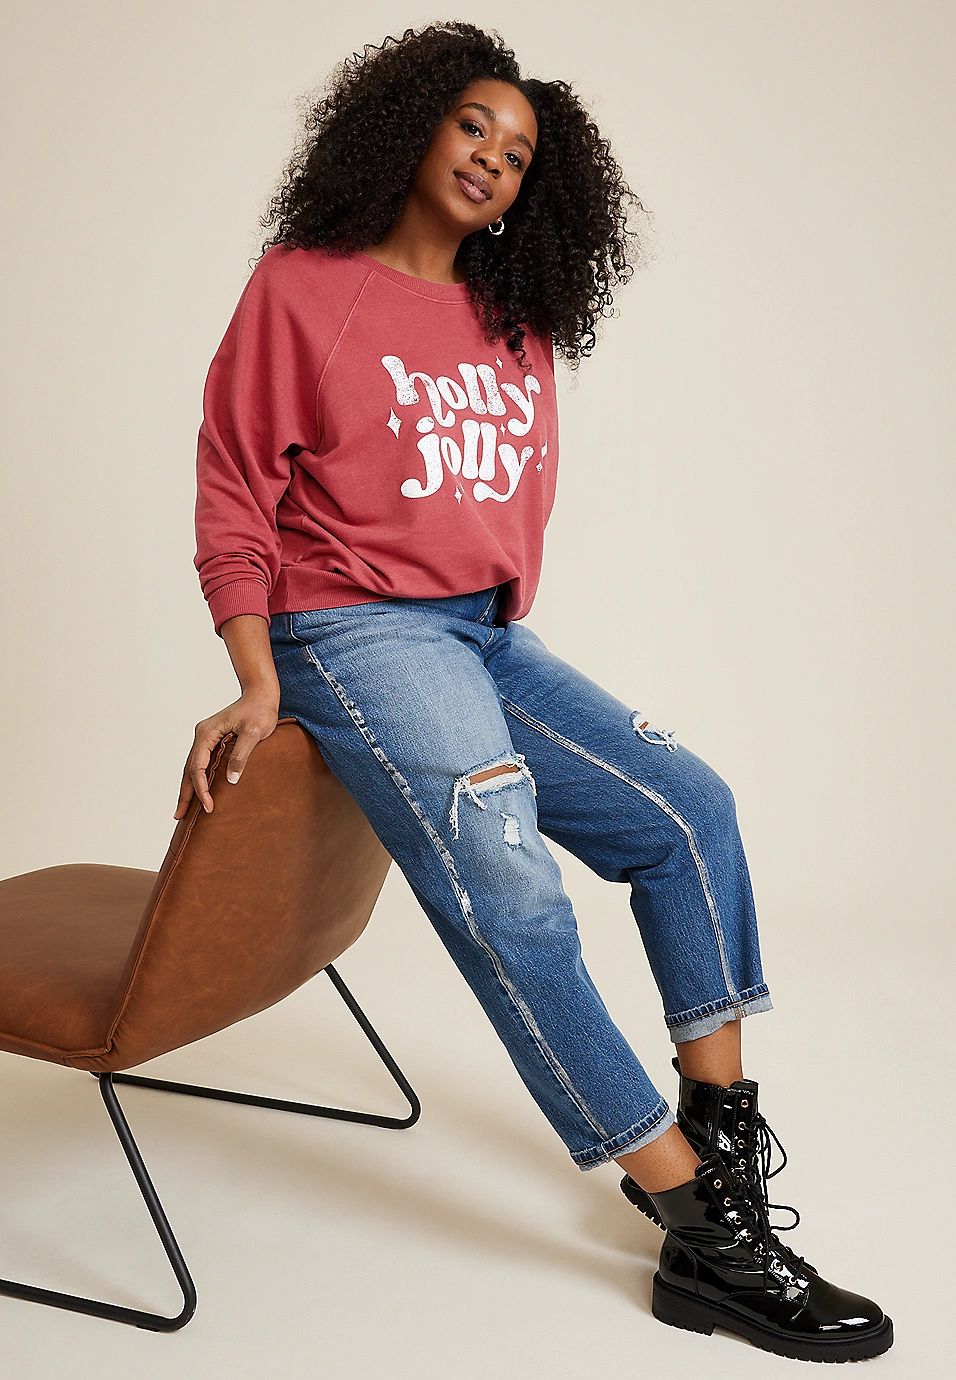 Holly Jolly Sweatshirt | Maurices